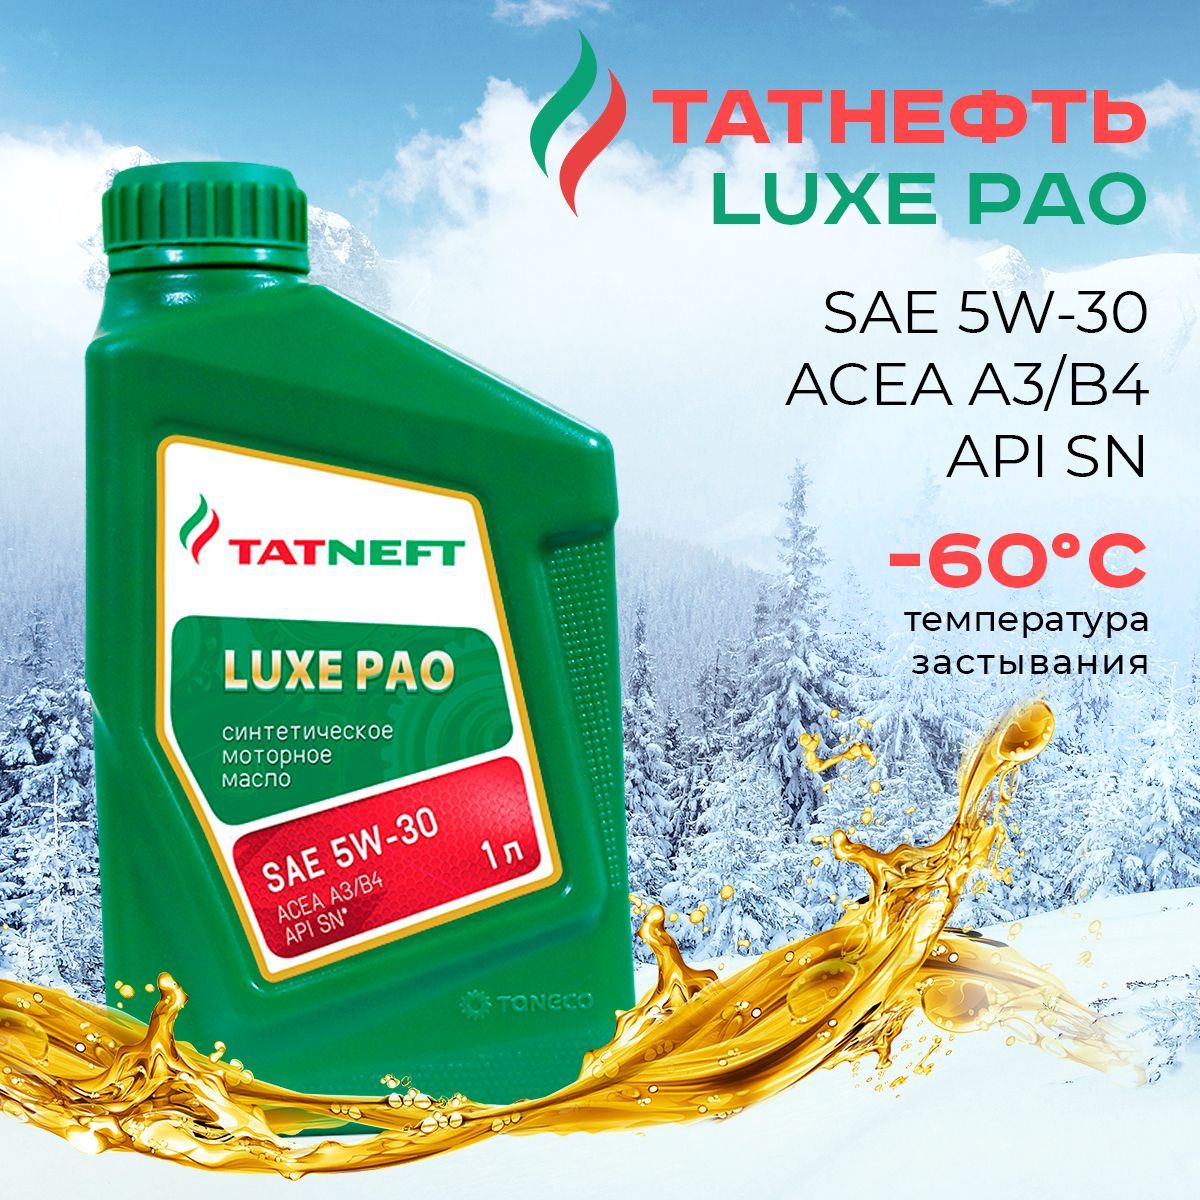 Моторное масло татнефть 5w 30. TATNEFT Luxe Pao 5w30. Масло Татнефть Luxe Pao 5w30. Татнефть Luxe Pao 5w-30. TATNEFT Luxe Pao 5w30 a5 b5.